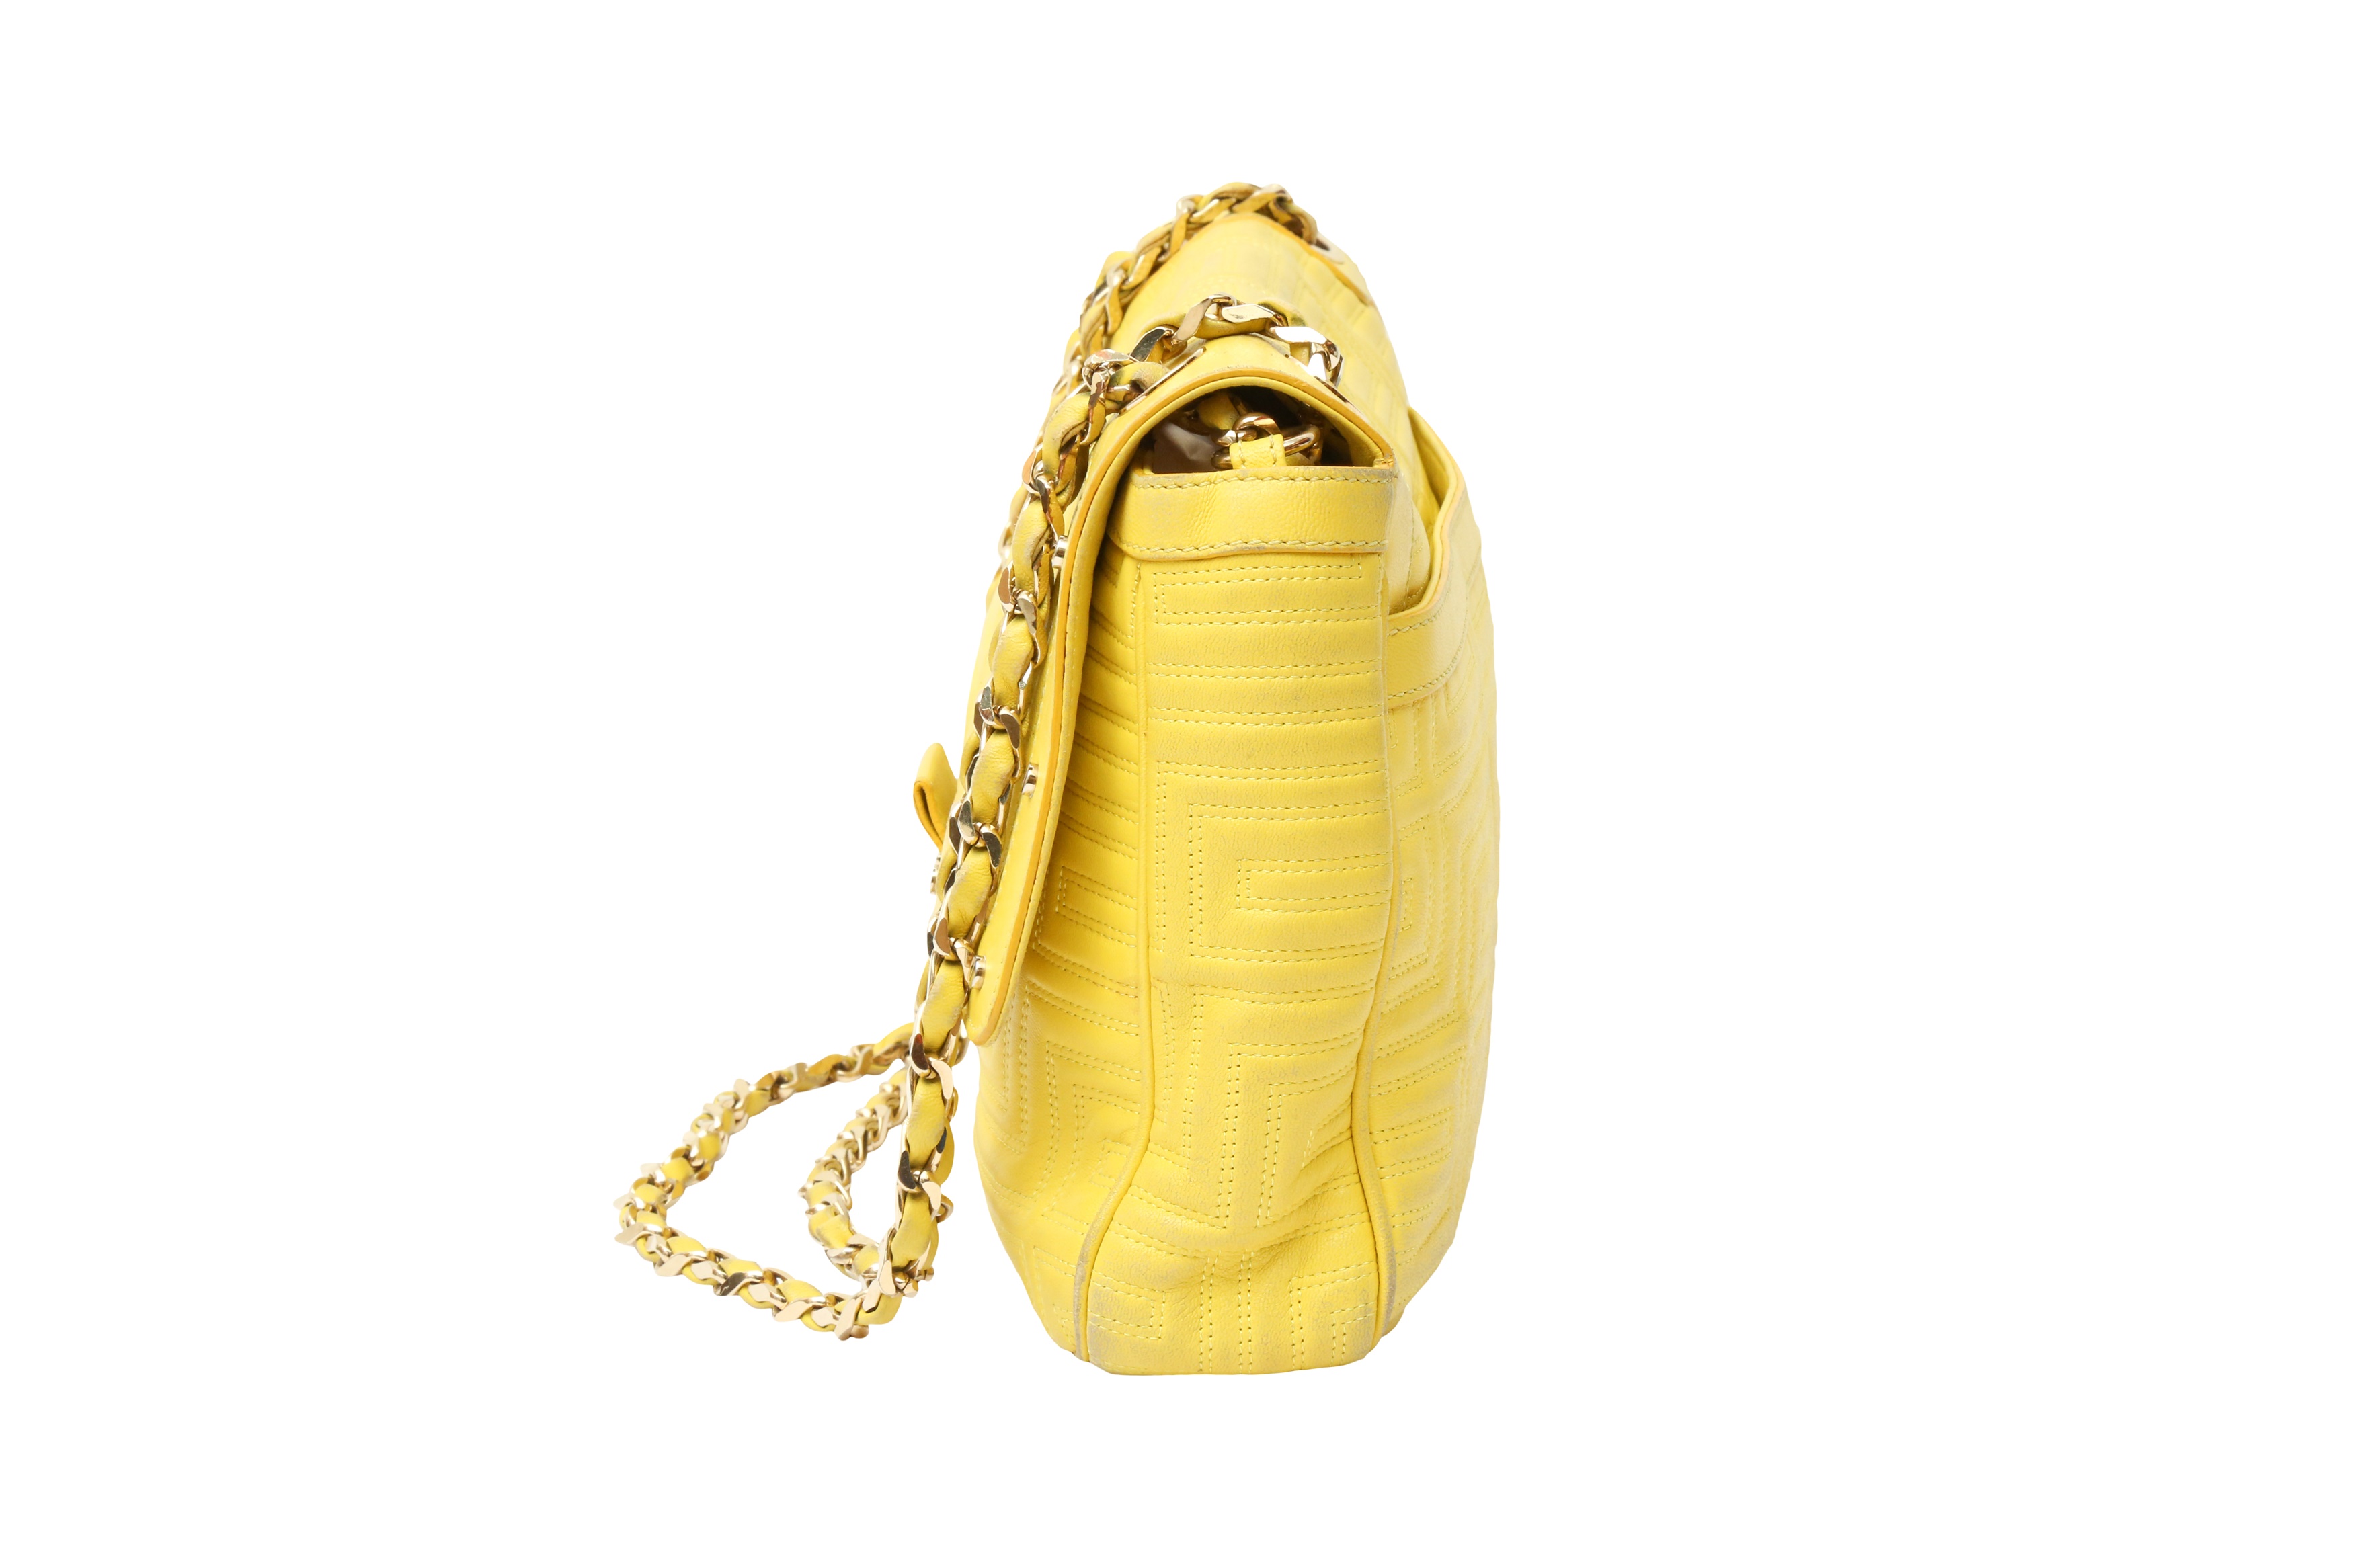 Gianni Versace Couture Yellow Chain Flap Bag - Image 2 of 6